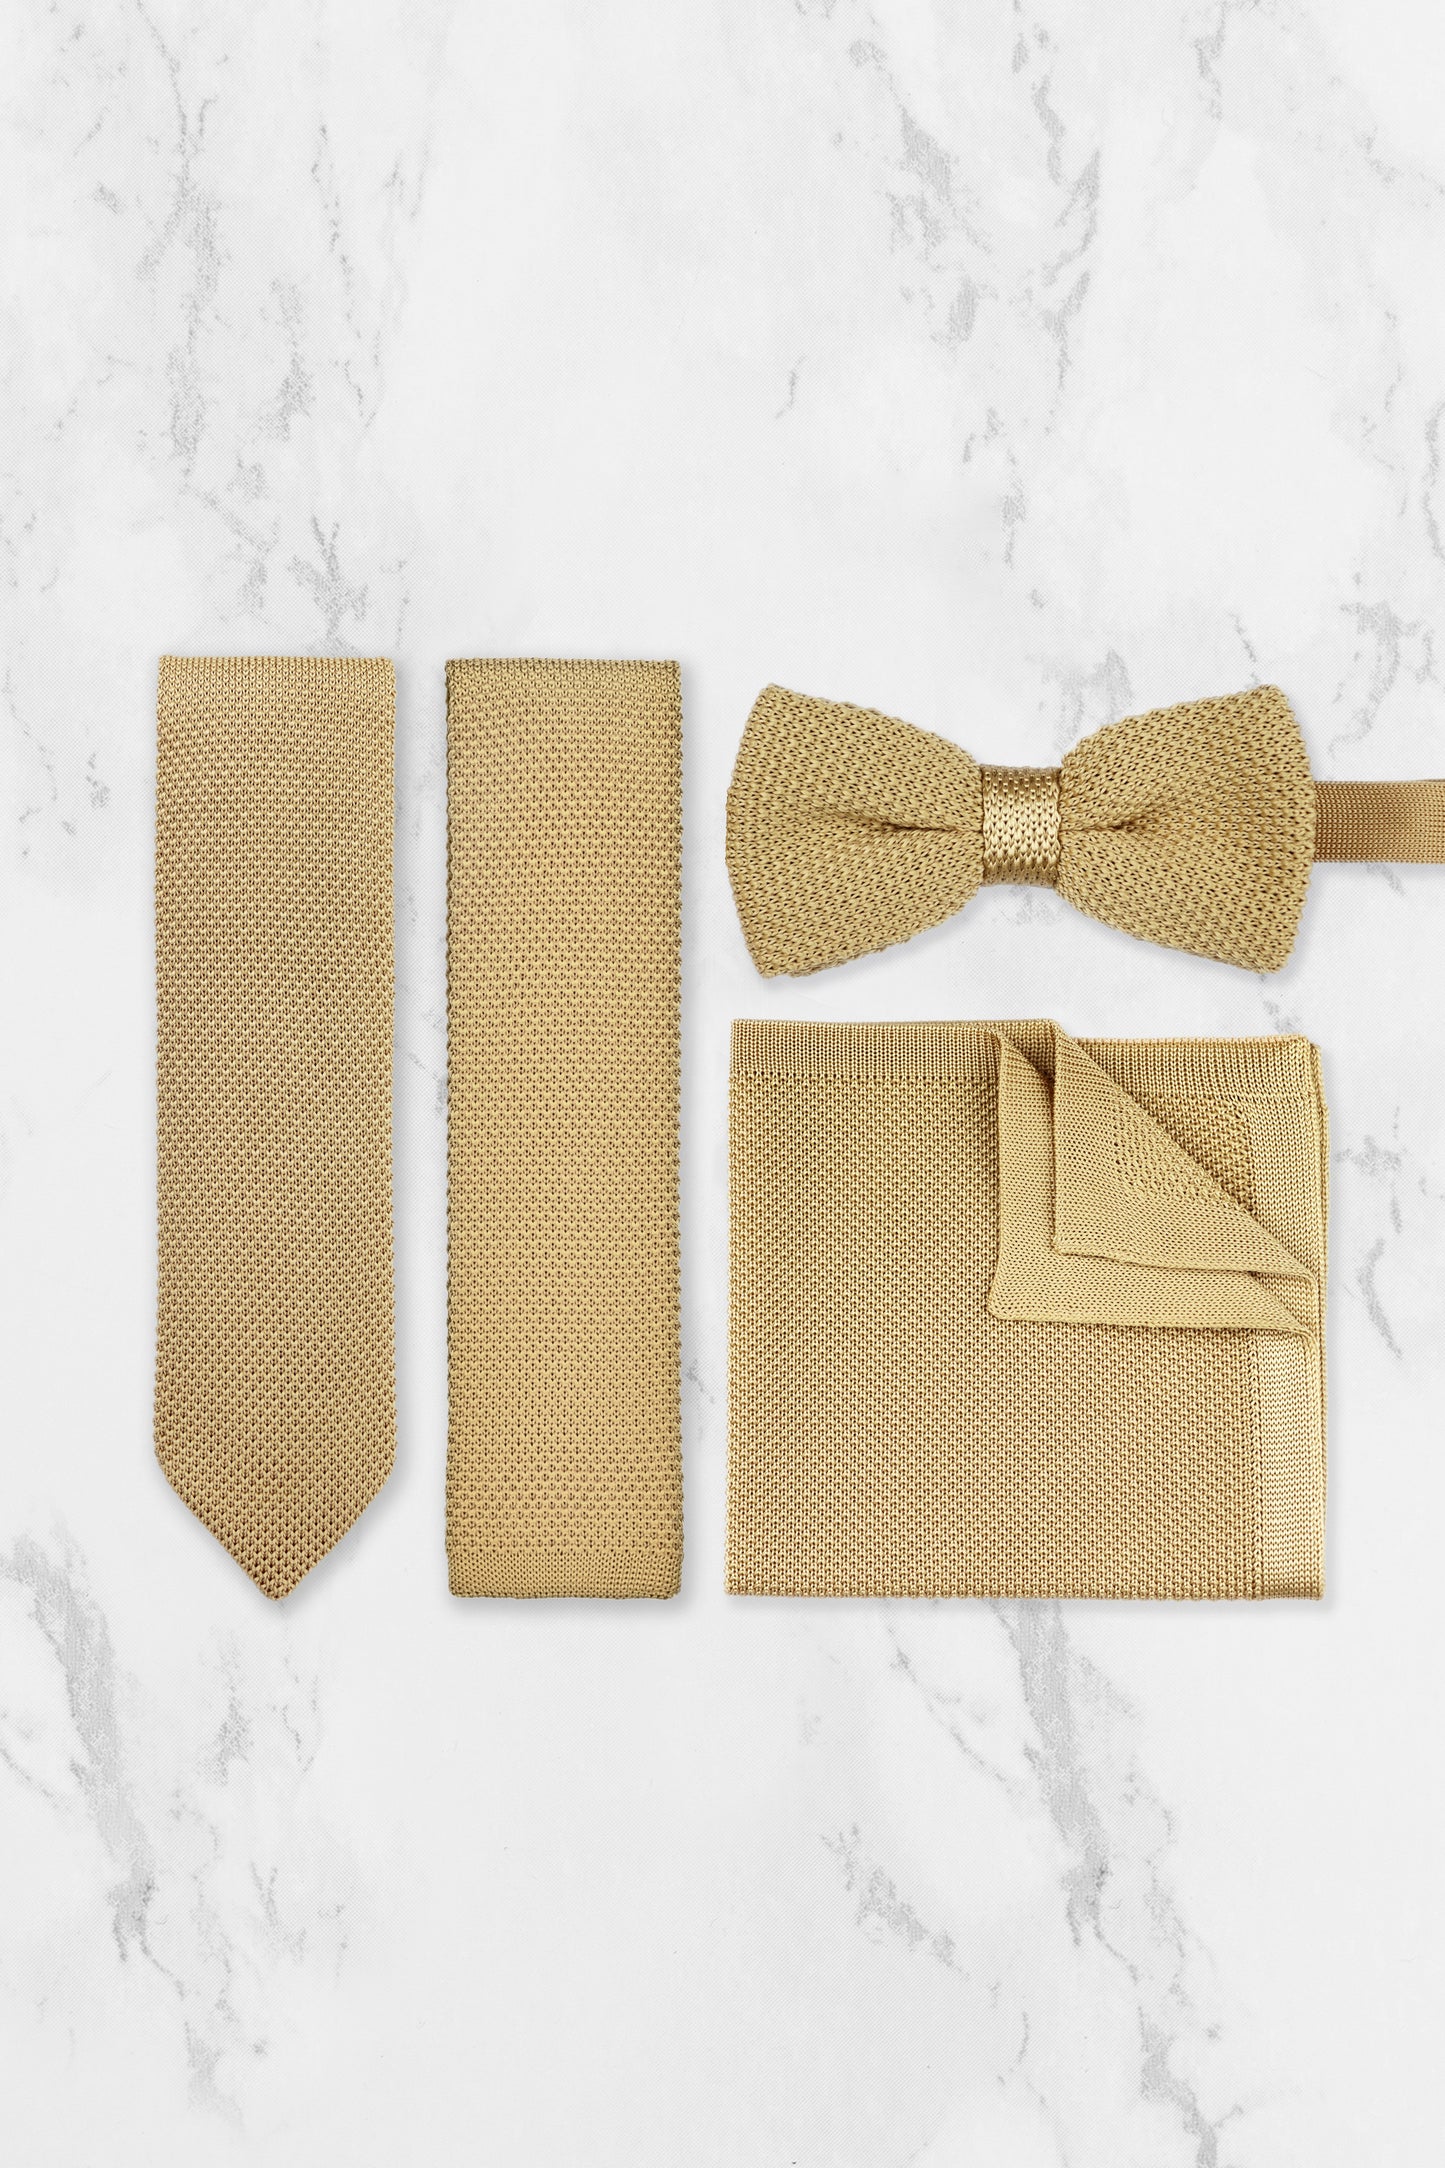 100% Polyester Knitted Pocket Square - Beige